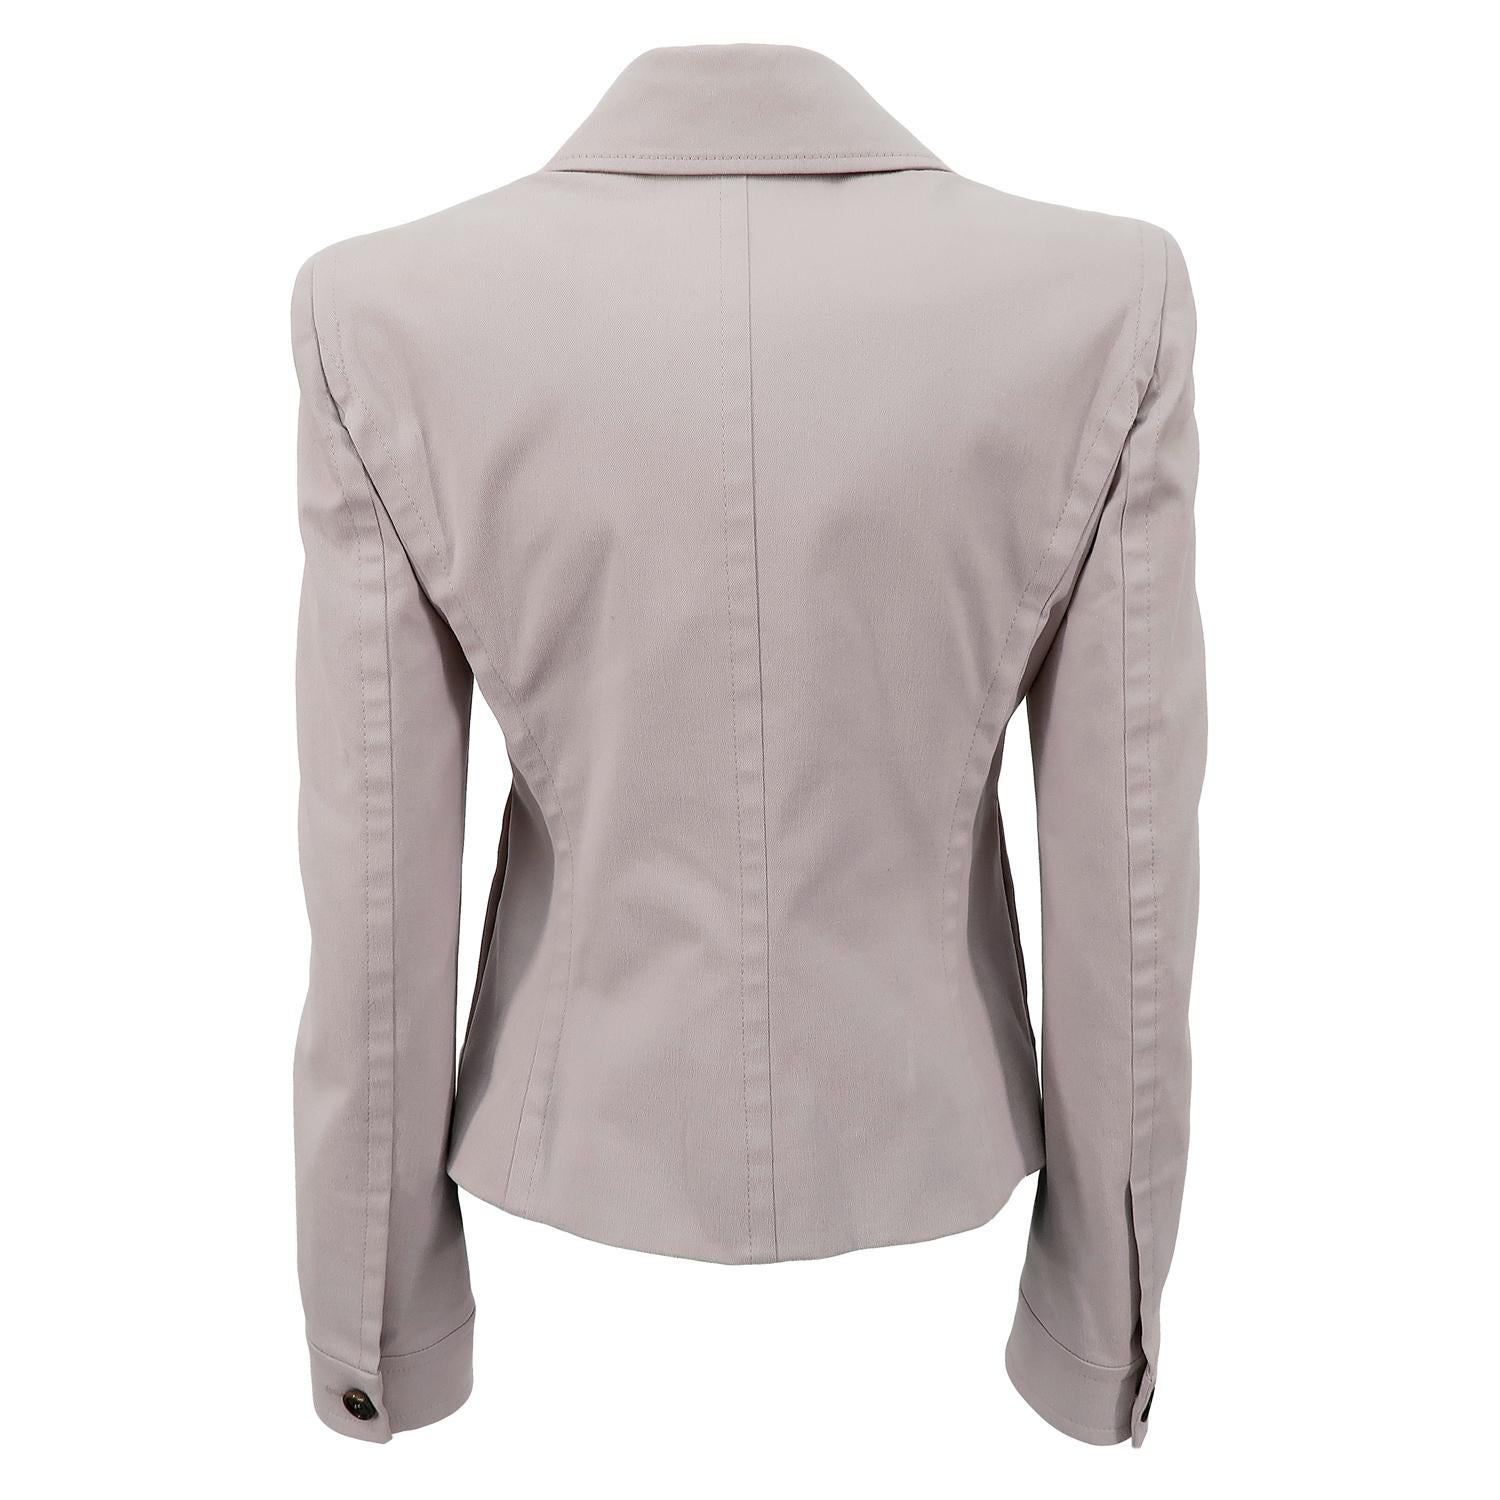 Balancing the sleek with the frivolous was a leitmotiv for Tom Ford during his years at the House of Yves Saint Laurent. Here, he pairs the streamlined shape of a classic blazer with the extravagance of statement ruffles. This striking jacket can